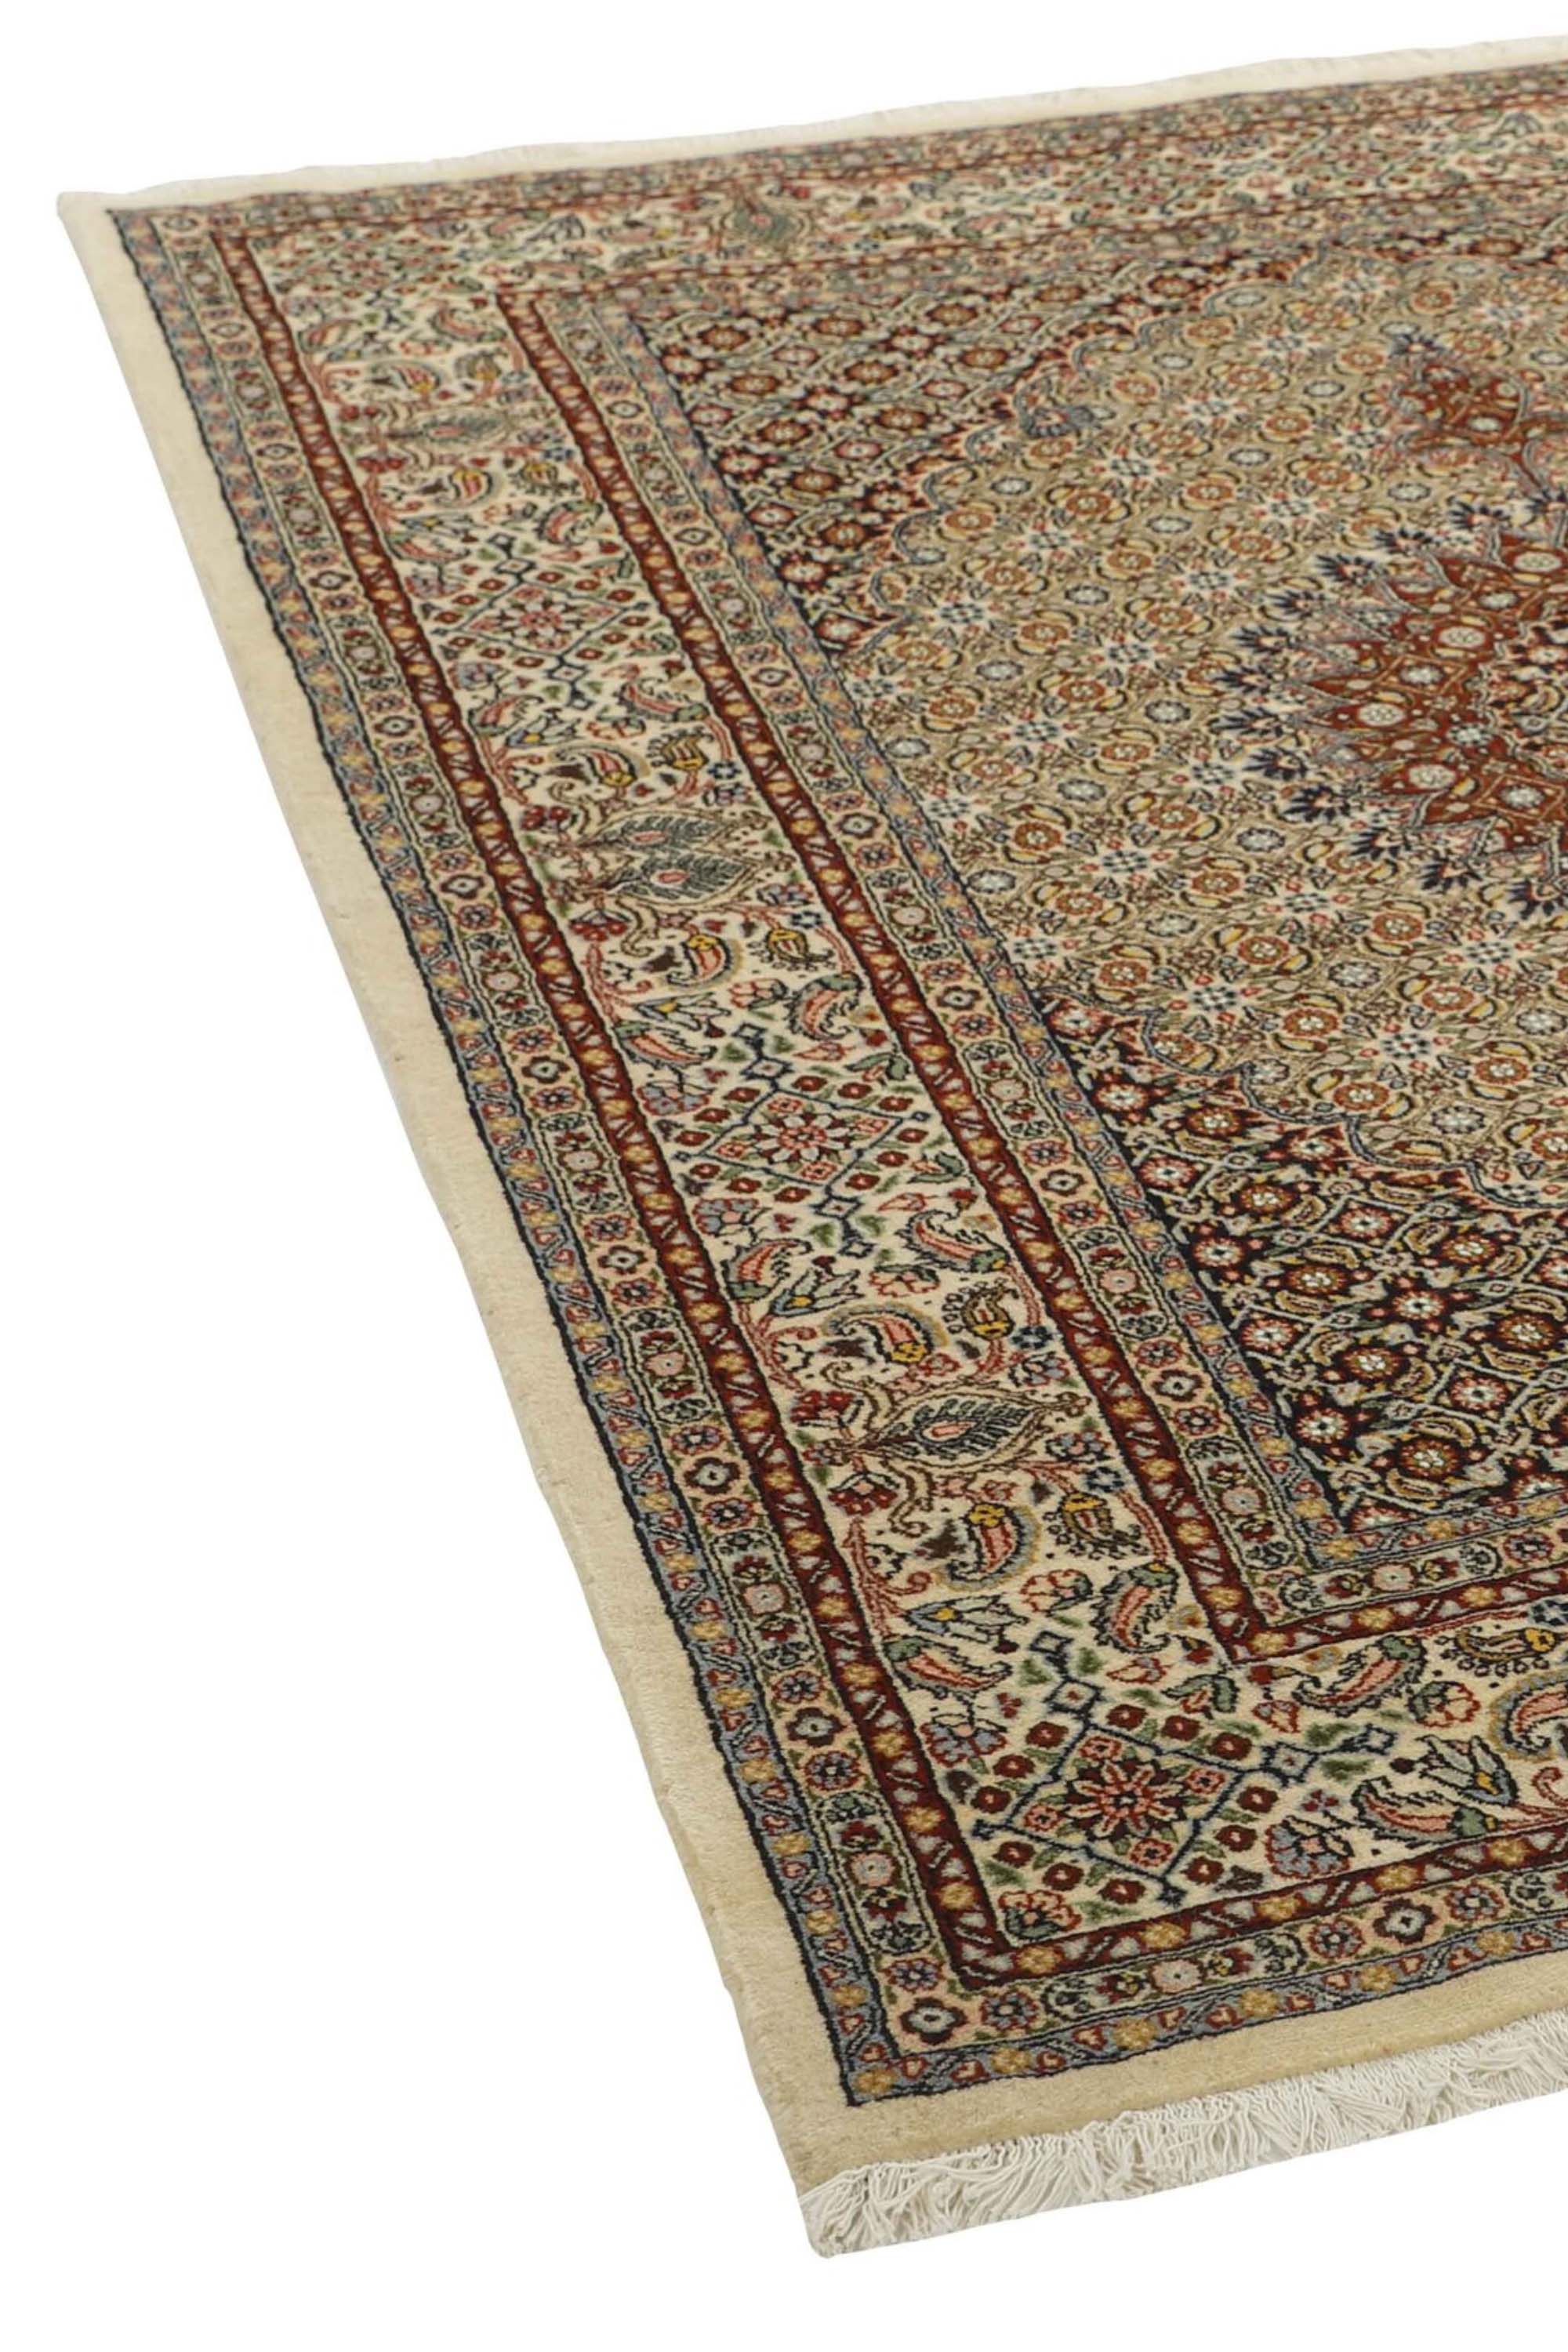 Authentic Persian Moud Mahi rug with brown and cream floral pattern